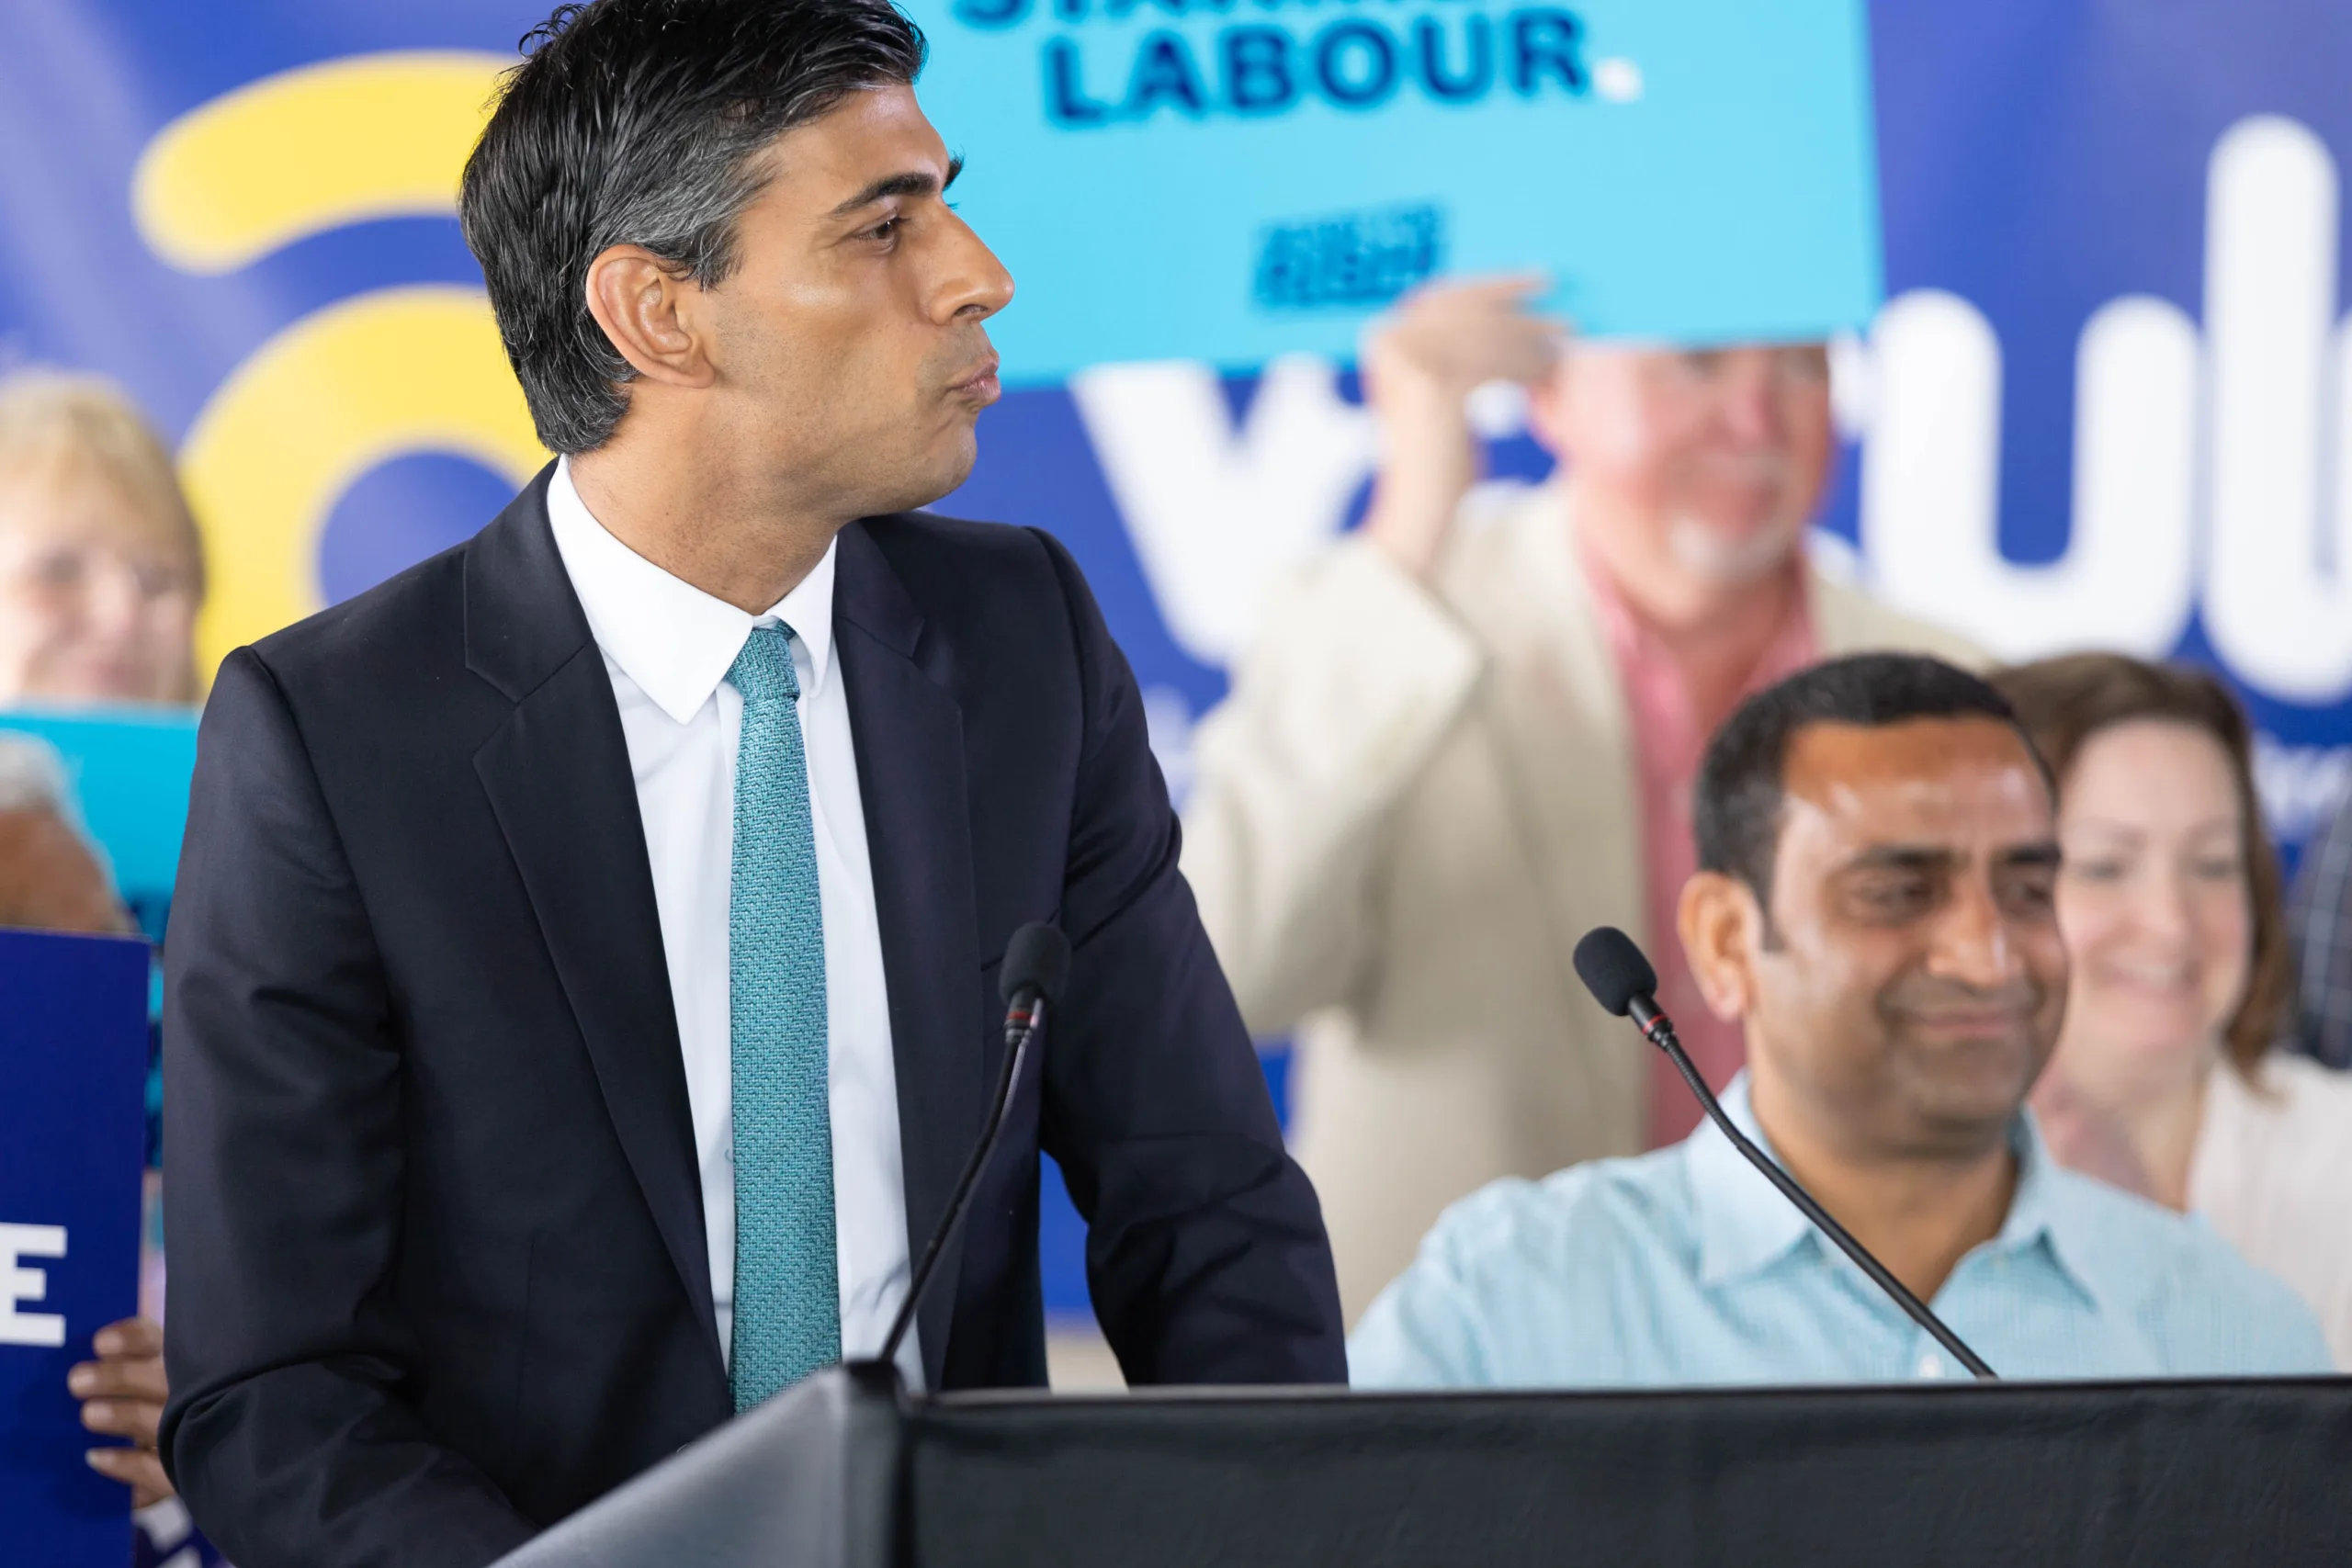 The 32 councillors (the bulk of the 35 Conservatives on Fenland District Council) told Rishi Sunak that whilst they don’t all share the opinions on all subjects “we are united in our grave concern at events this week in Westminster”. PHOTO: Terry Harris